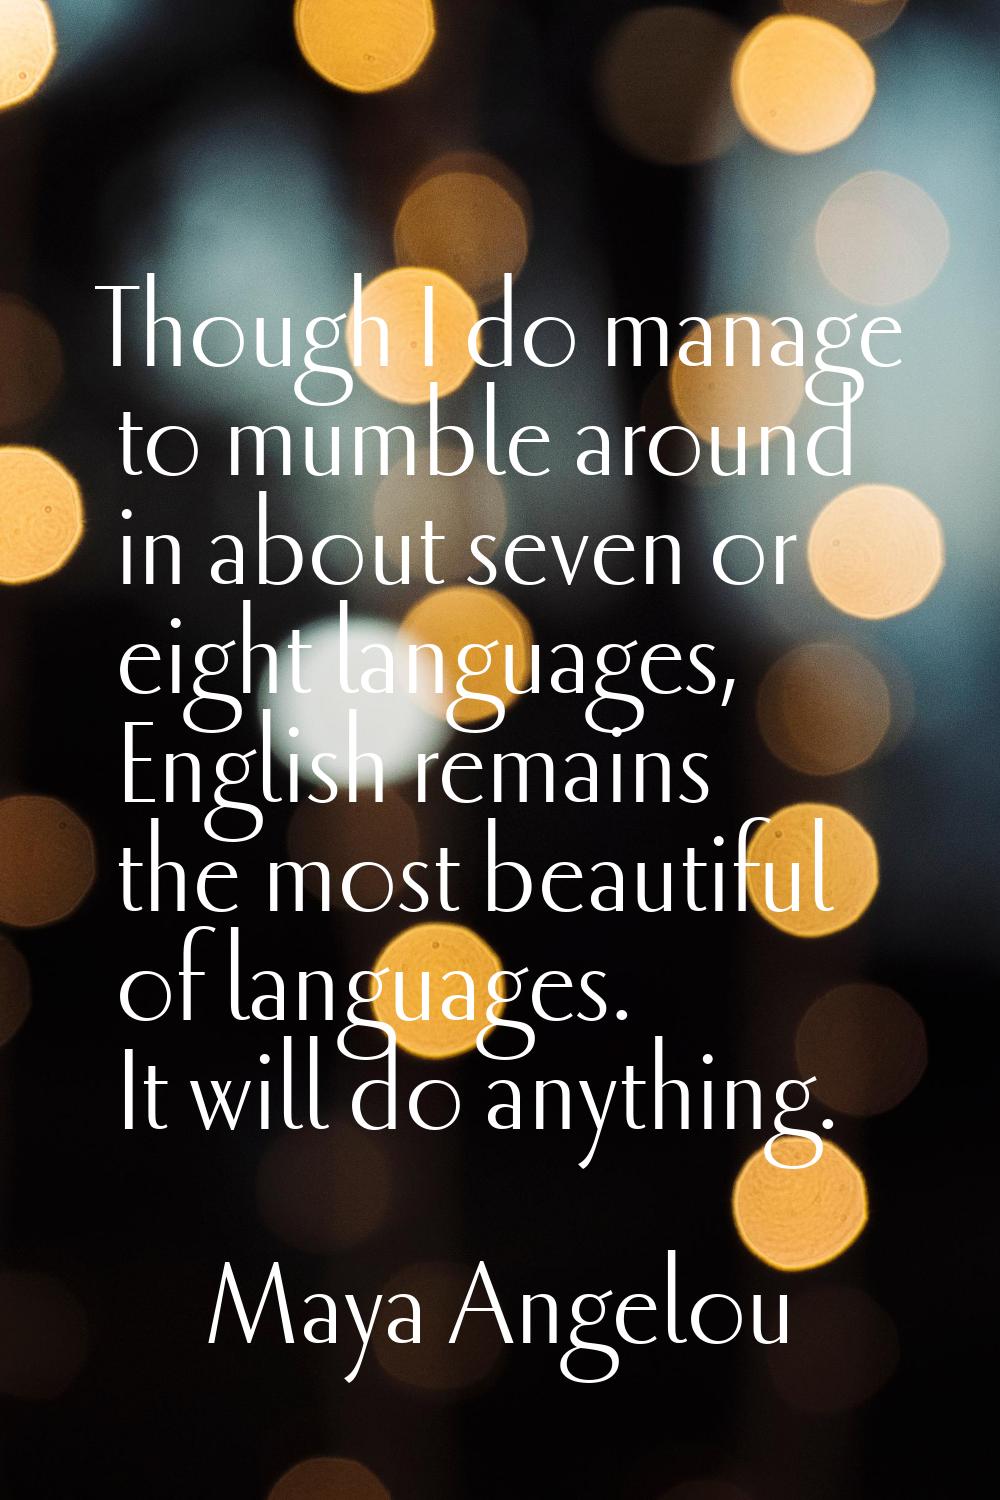 Though I do manage to mumble around in about seven or eight languages, English remains the most bea